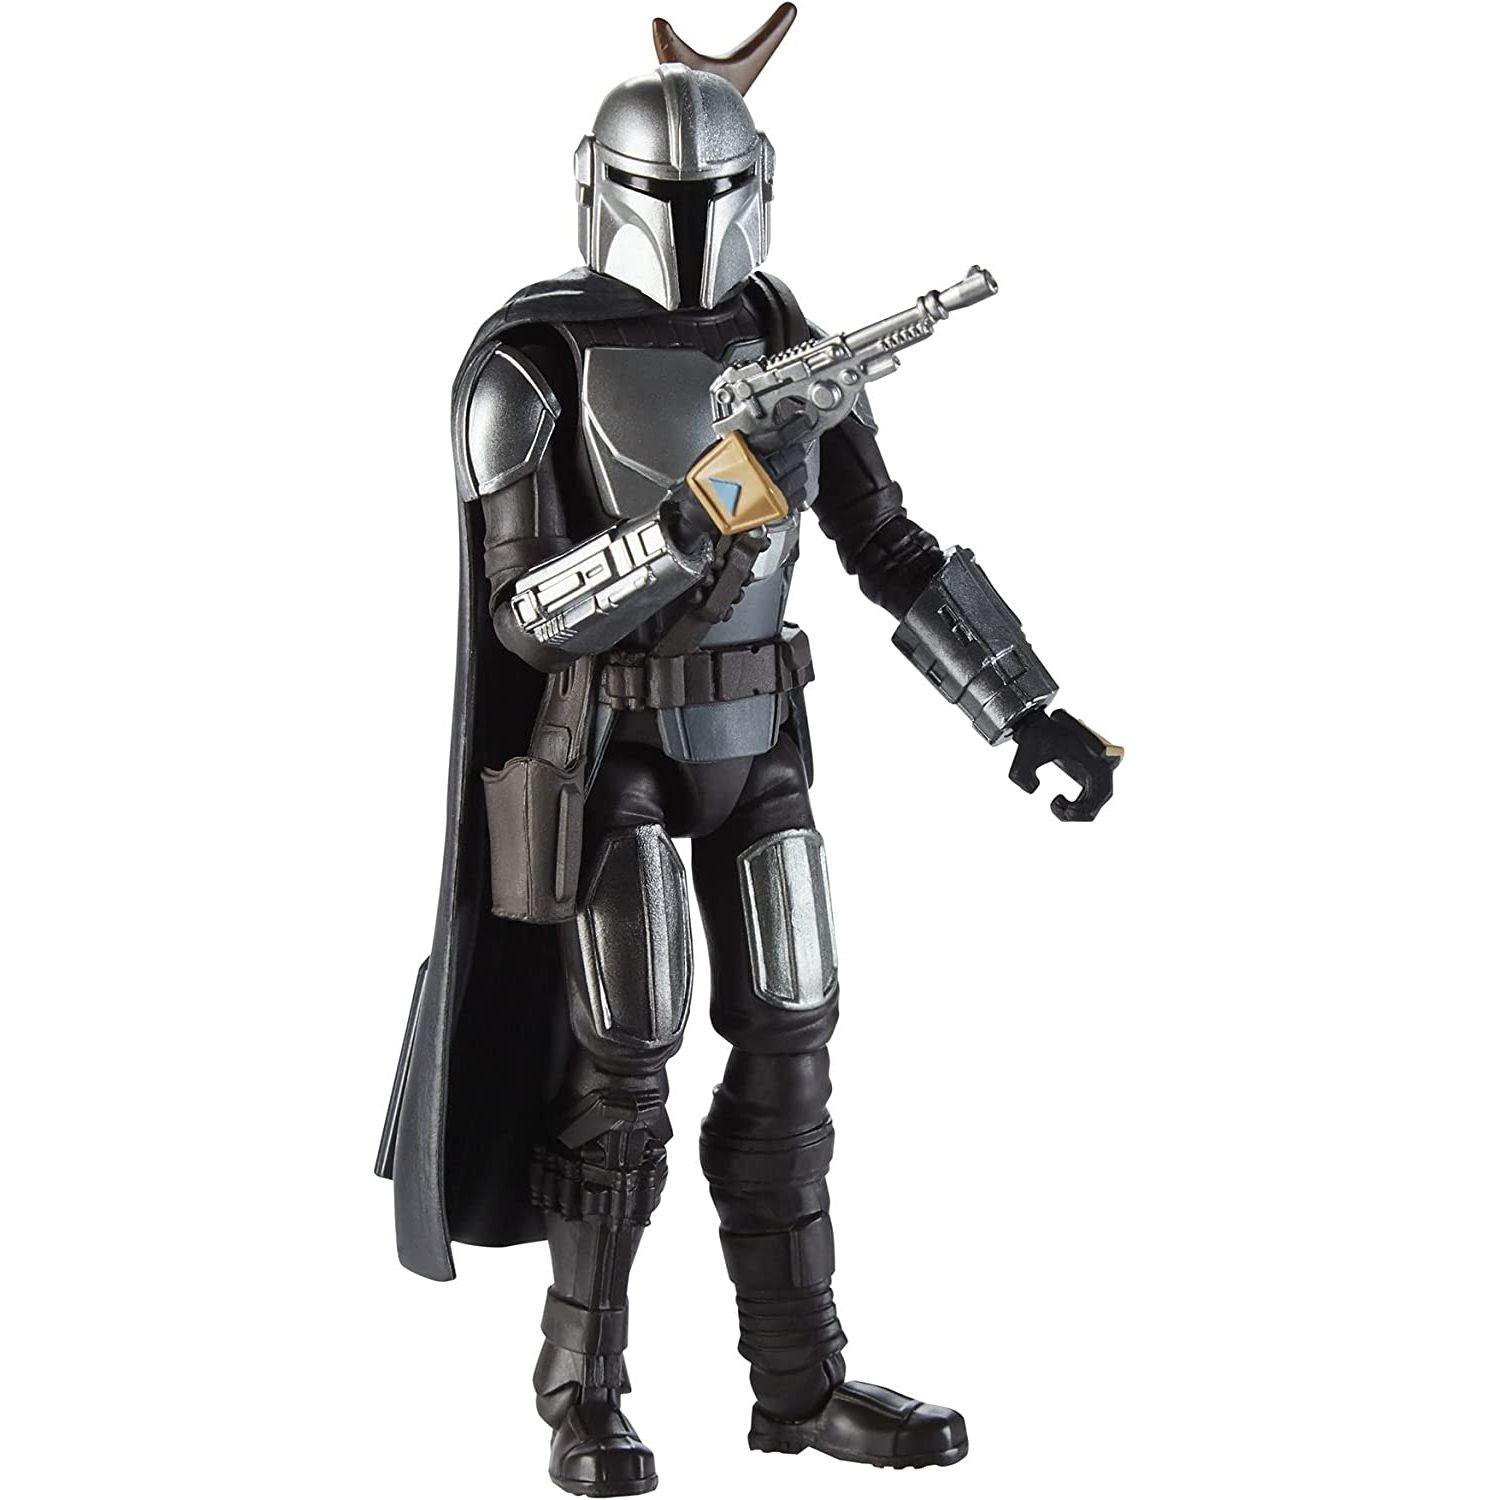 STAR WARS Galaxy of Adventures The Mandalorian 5-Inch-Scale Figure